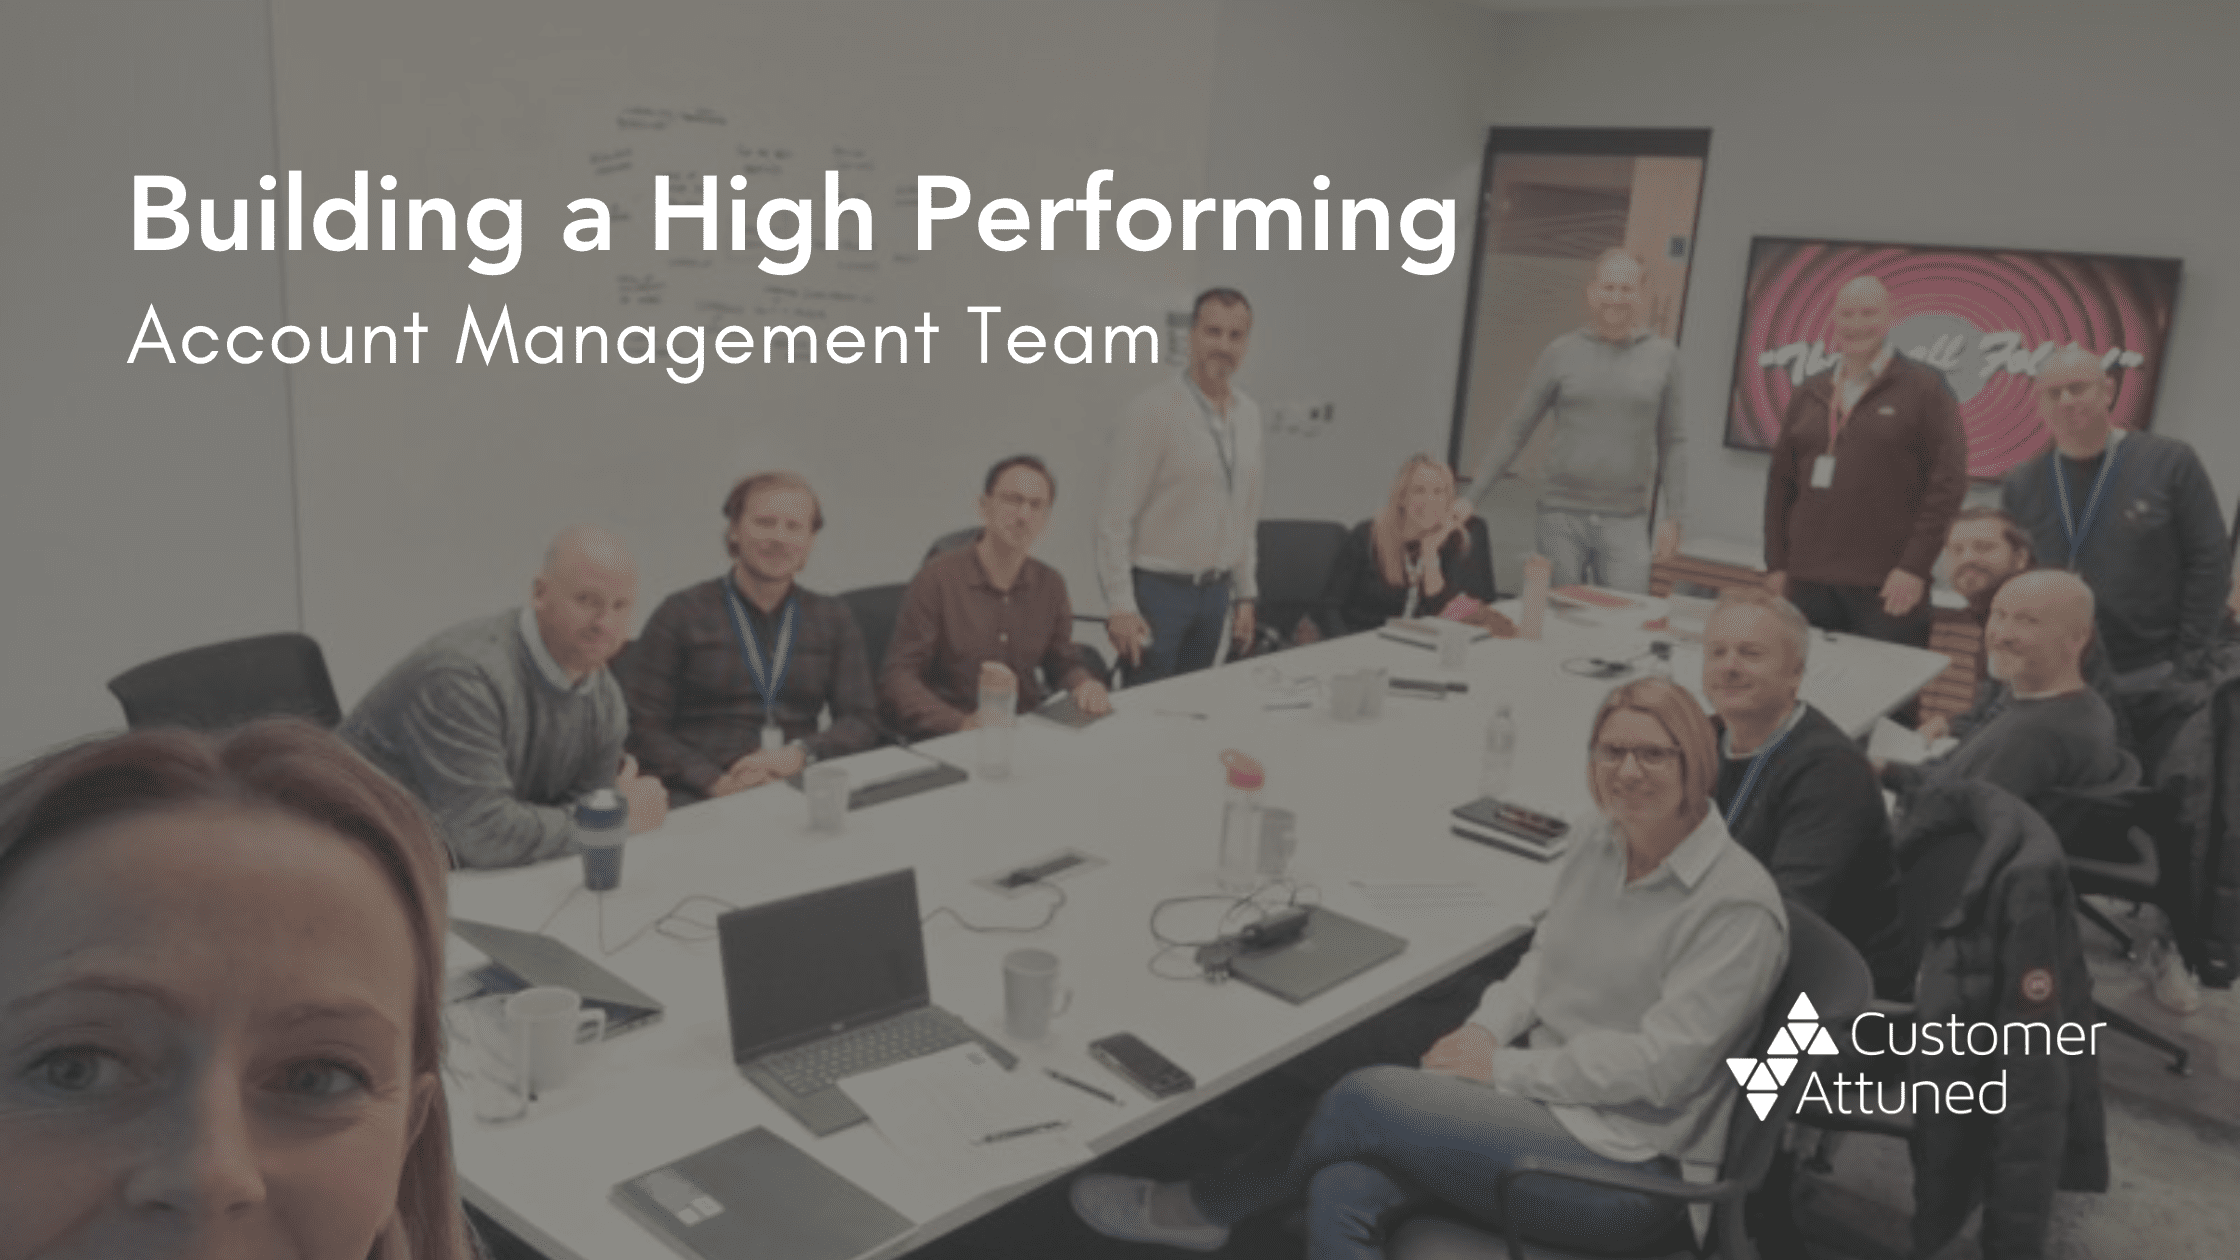 Building a high performing account management team